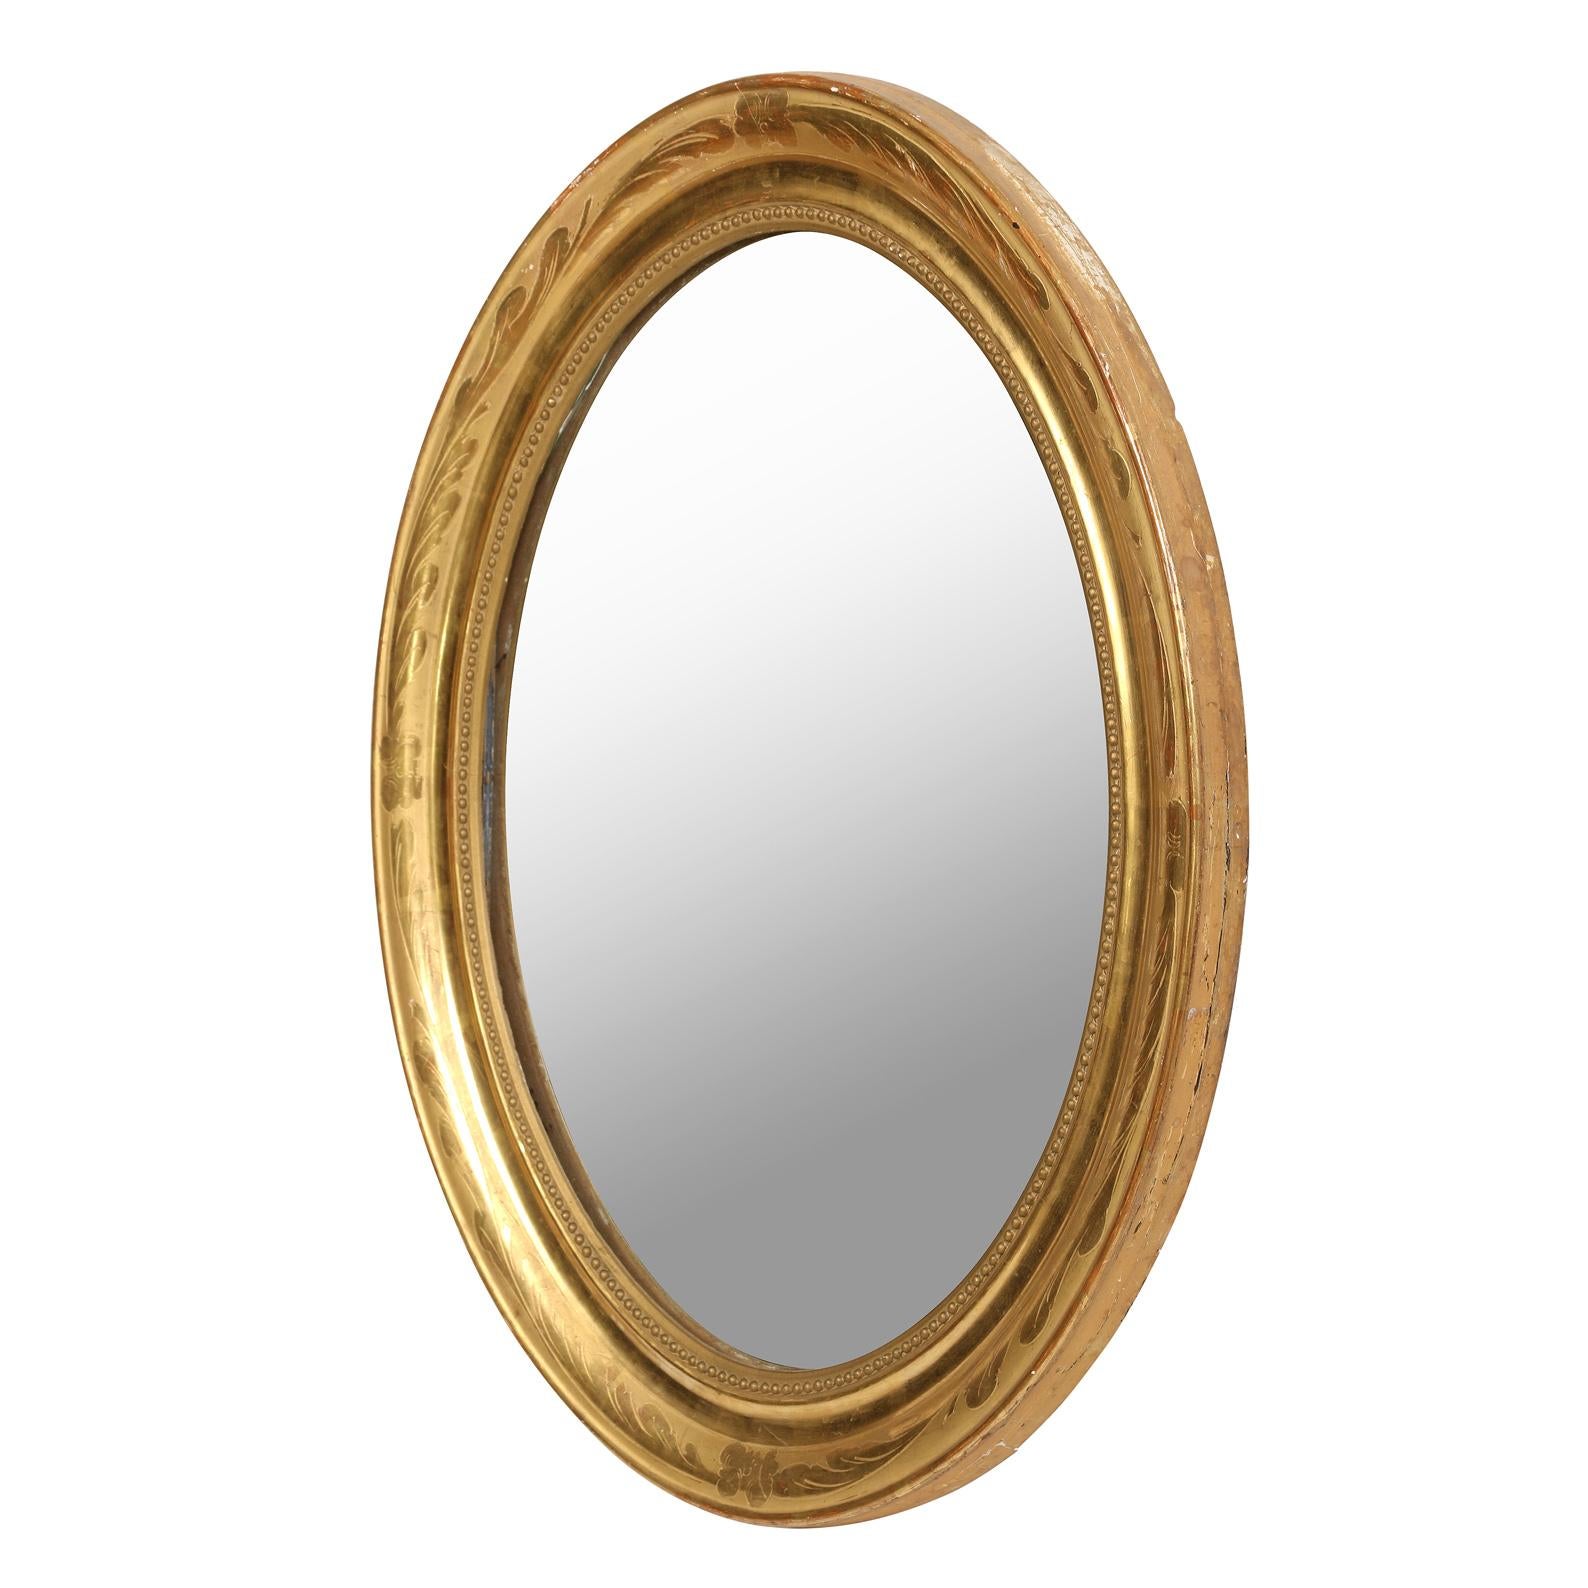 20th Century An Oval Giltwood Mirror with Inner Beading Molding For Sale